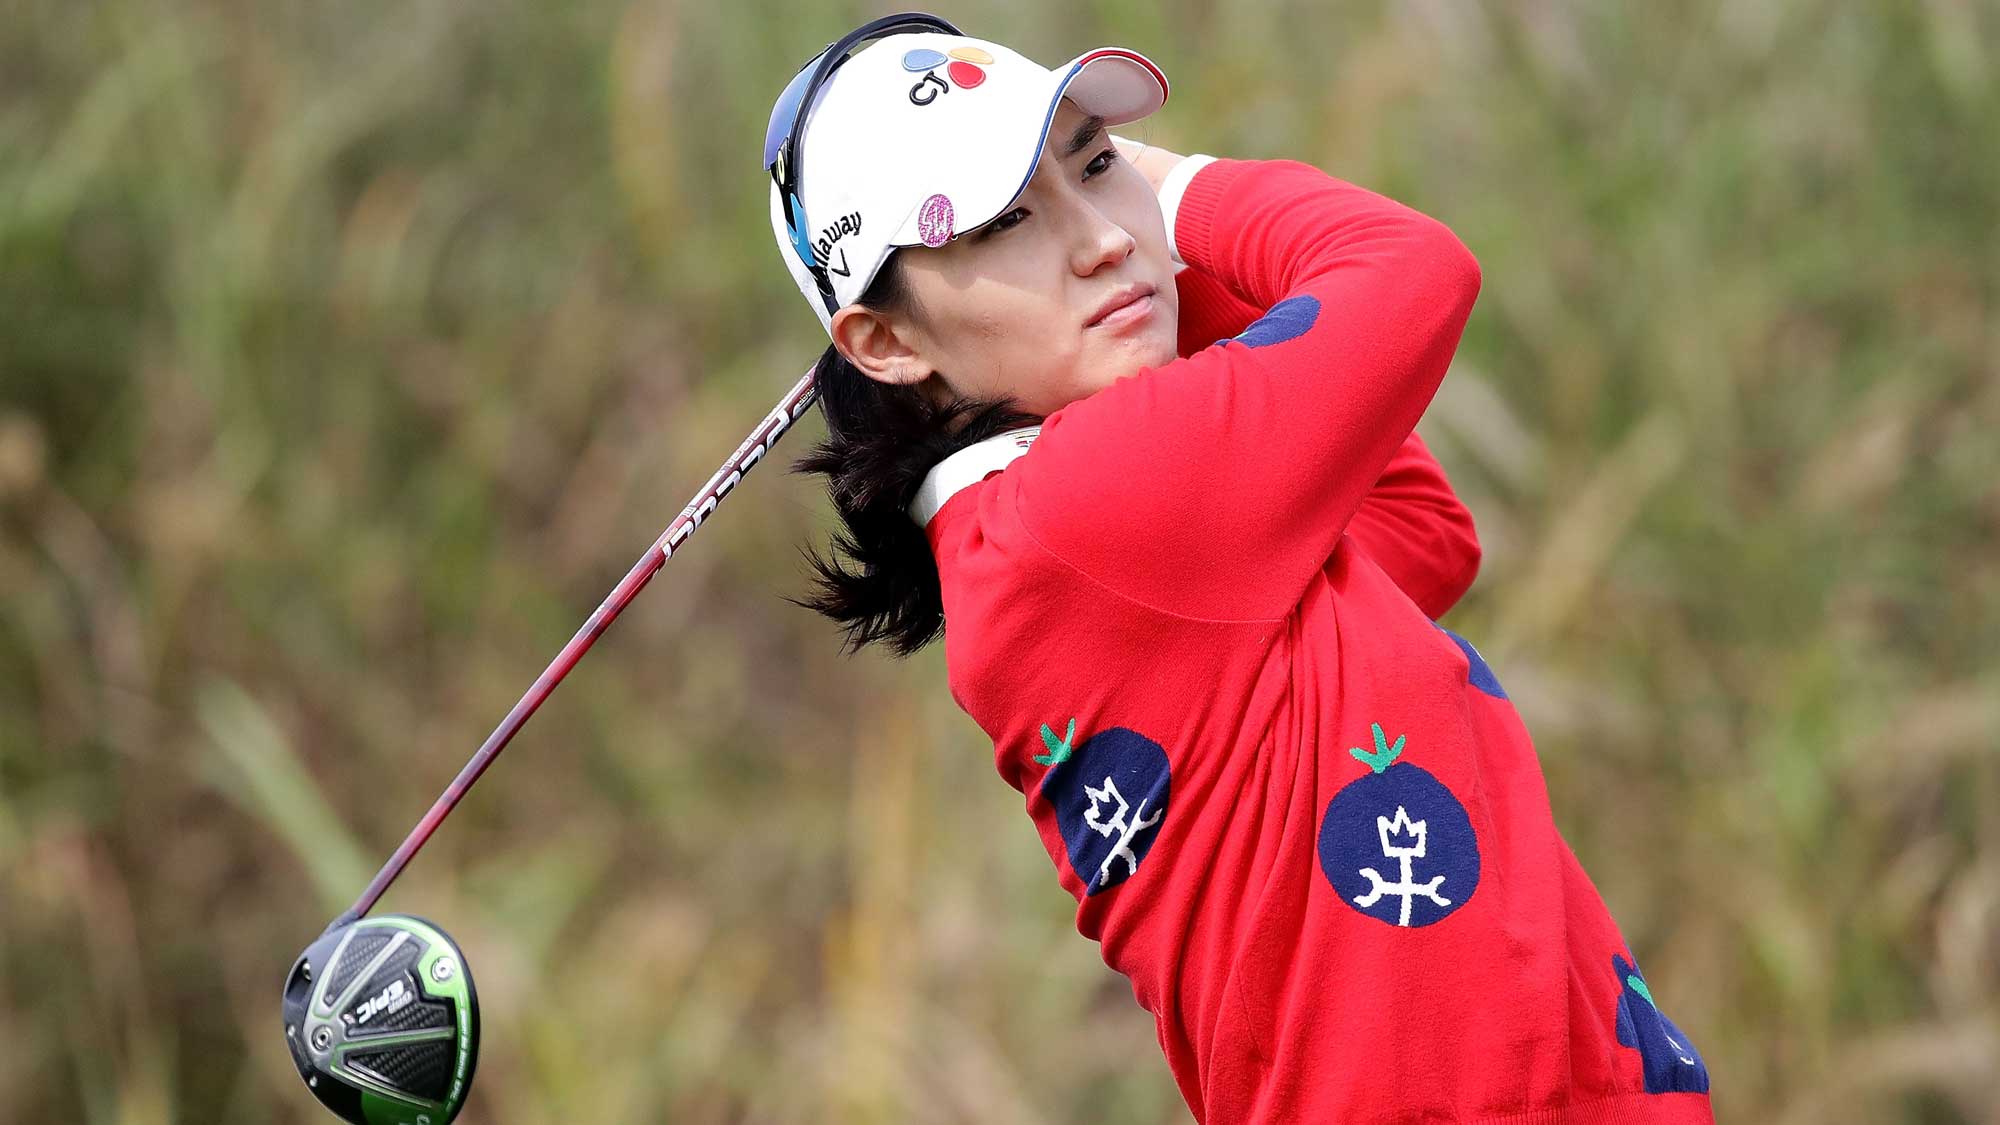 Min-Sun Kim of South Korea plays a tee shot on the 7th hole during the first round of the LPGA KEB Hana Bank Championship